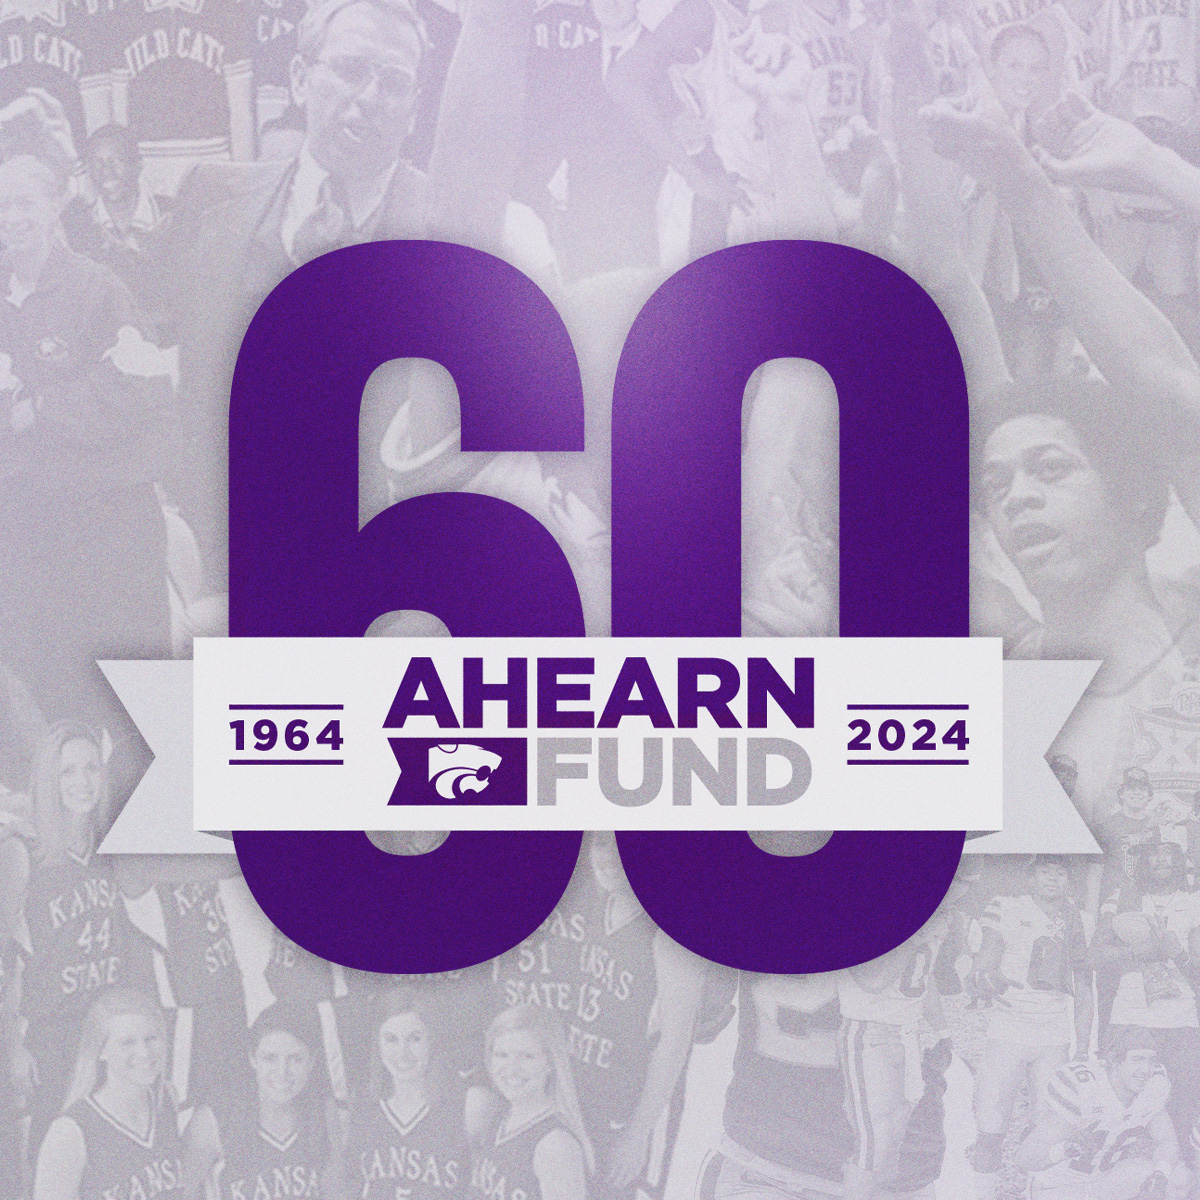 For 60 years, the Ahearn Fund has been the driving force in providing resources to student-athletes to succeed. Motivated to ensure a brighter future, the Ahearn Fund celebrates with 60 Days of Giving beginning this Wednesday, April 17. Learn More ➡️ ahearnfund.com/60